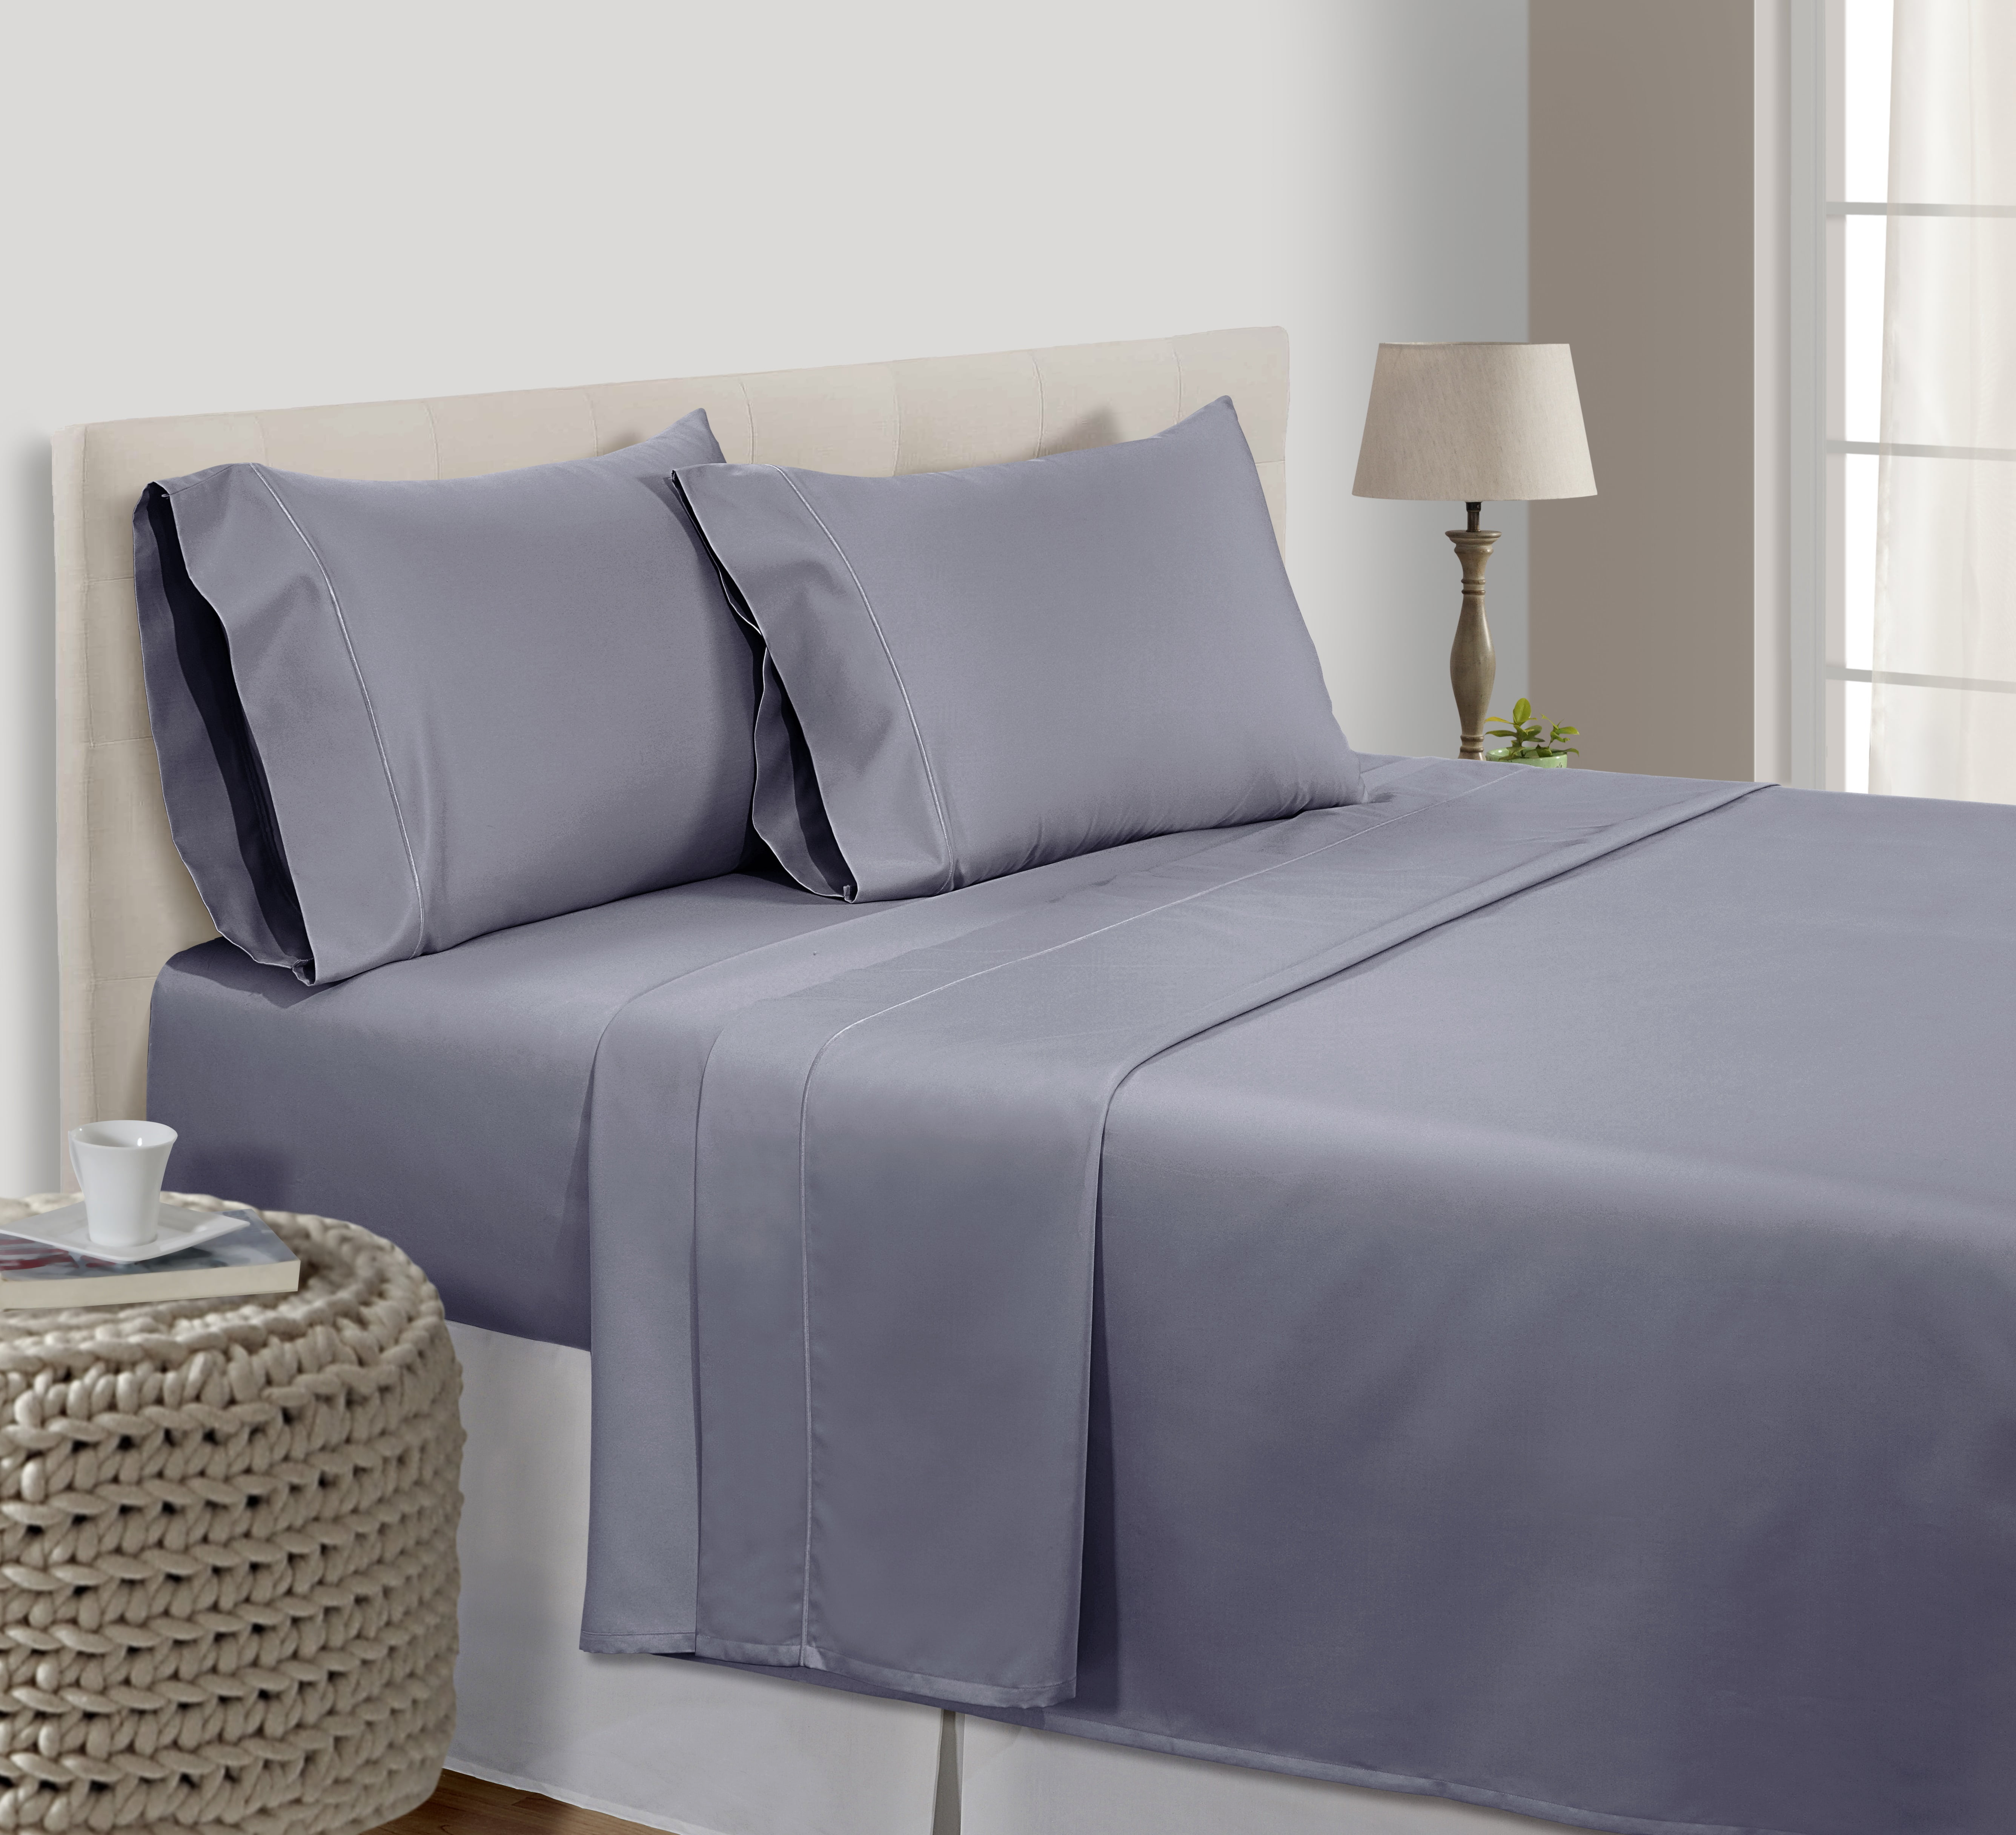 Luxury 400 TC Plain Dyed Extra Deep Bed Sheets 100% Pure Egyptian Cotton